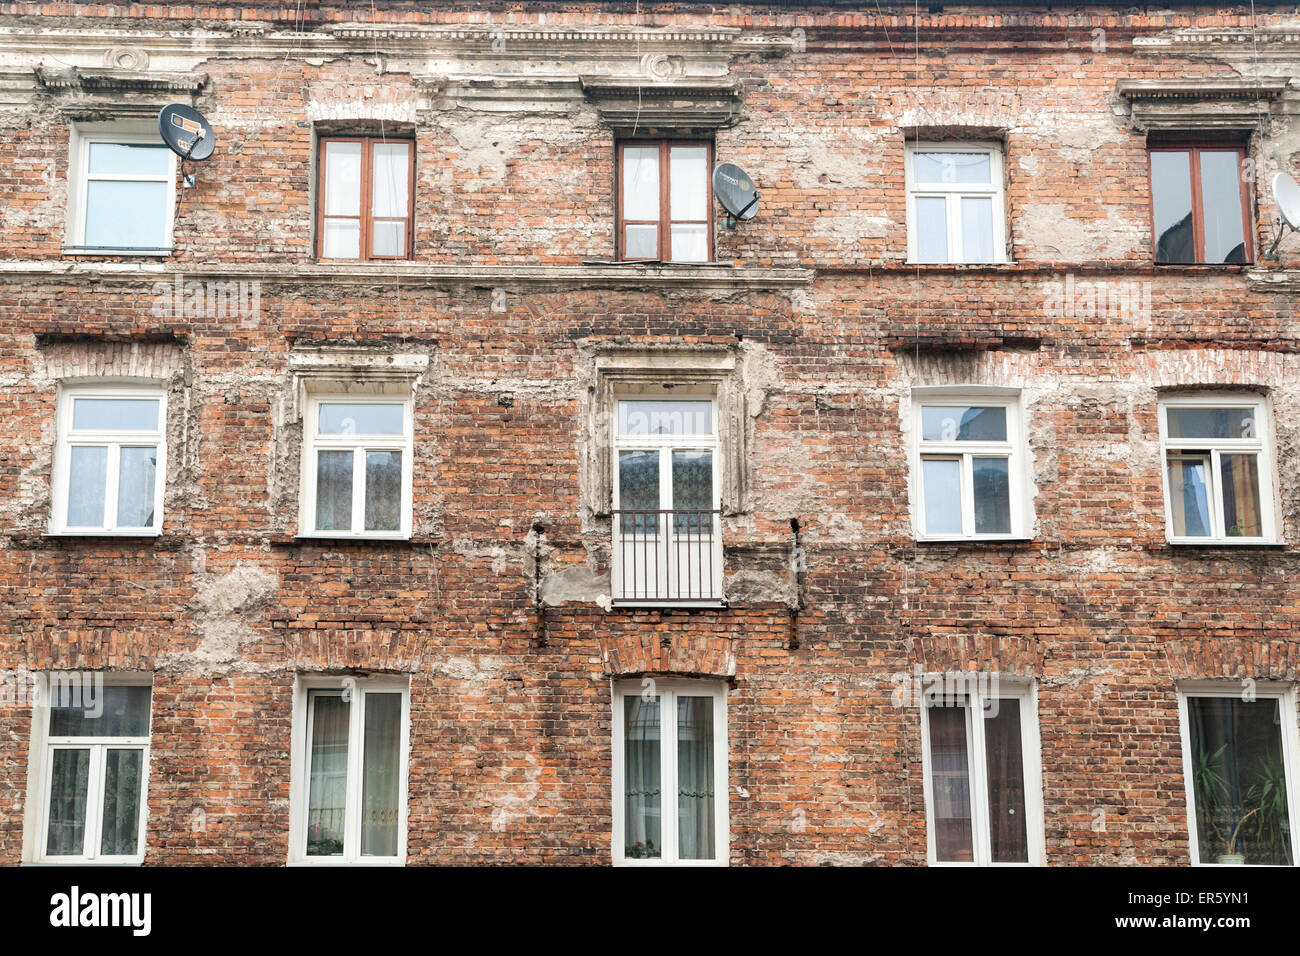 Exterior of an occupied brick apartment building left over from Communist time period when all decorations were removed, Warsaw Stock Photo